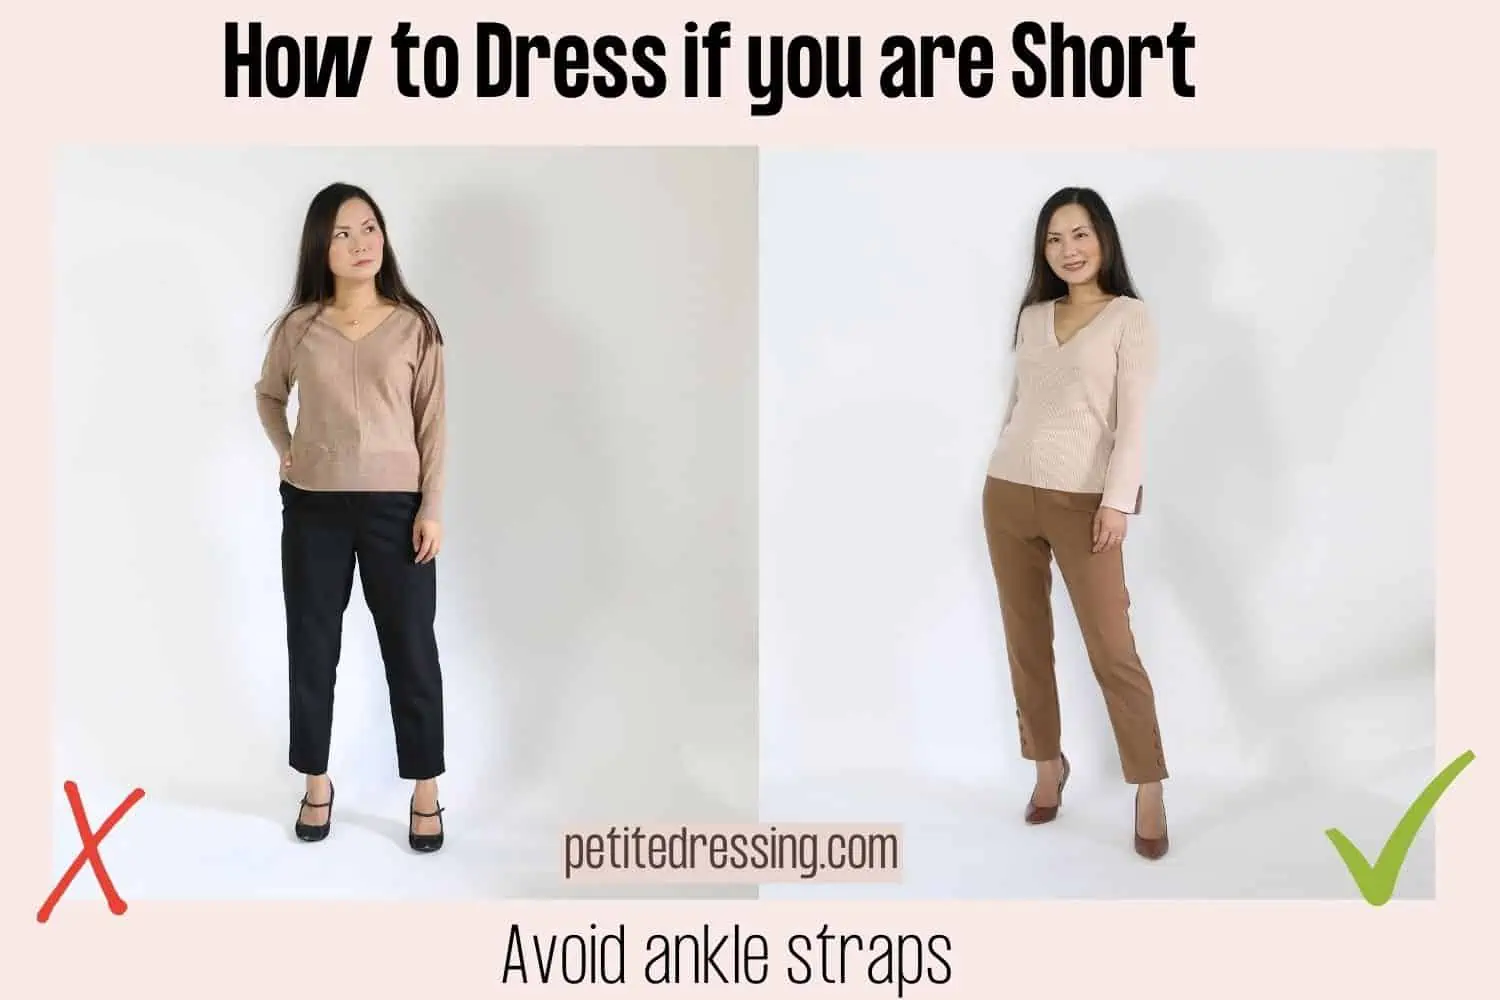 How to Dress as a Petite Woman: 10 Steps (with Pictures) - wikiHow